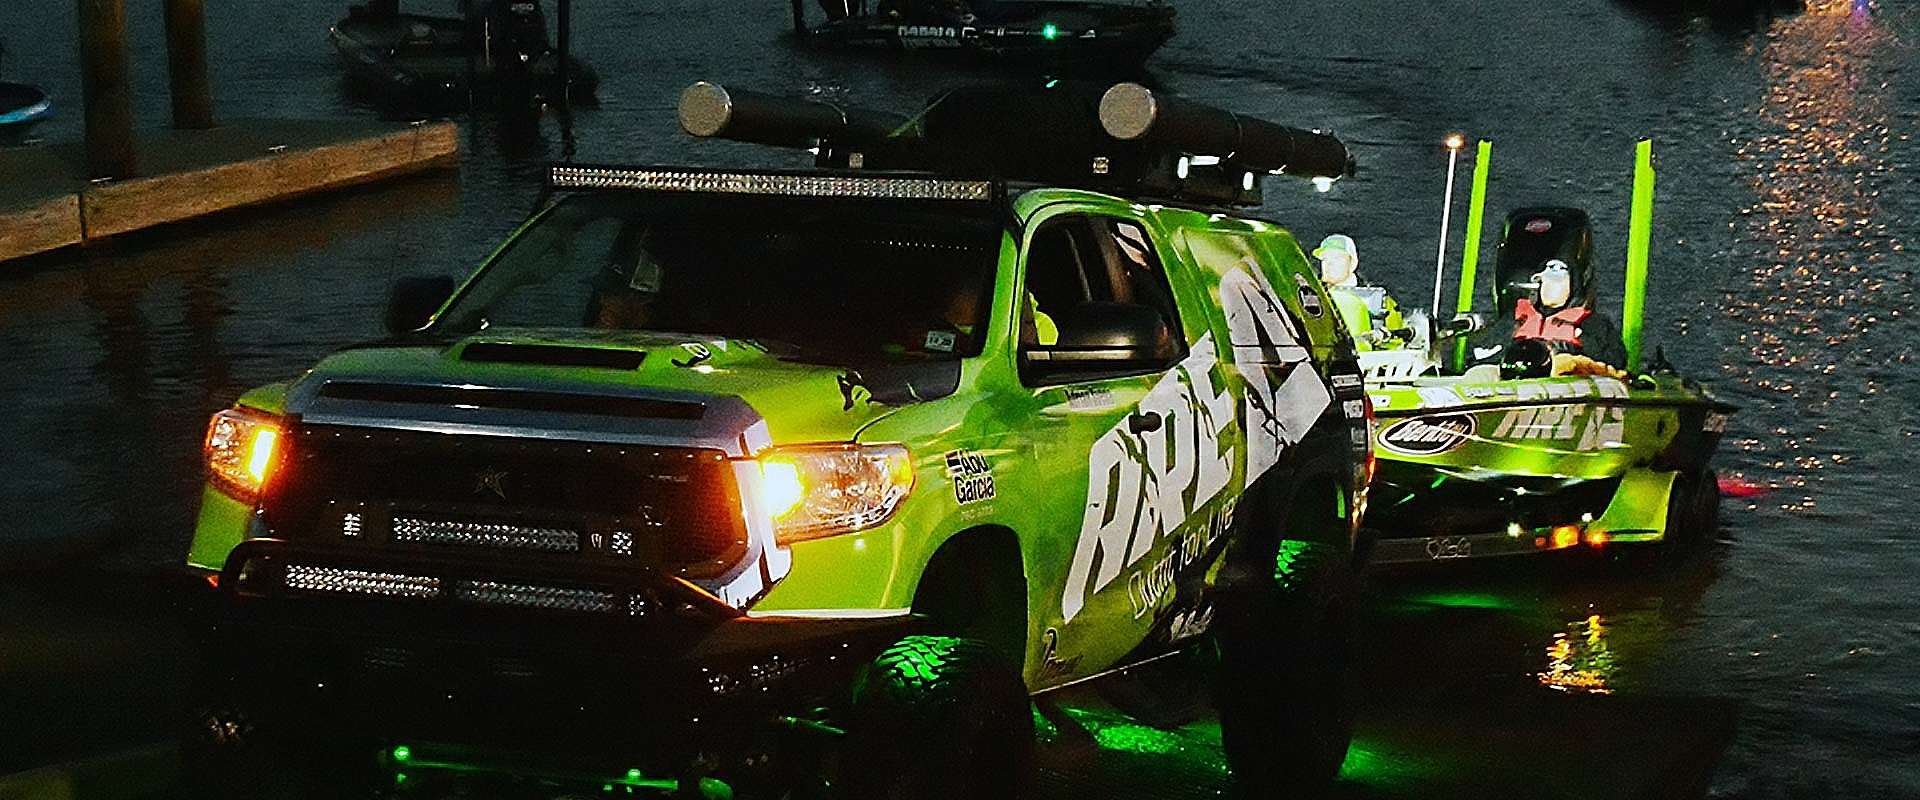 Once complete, a fully modified Tundra makes a statement â¦ even on the ramp at an Elite Series event!